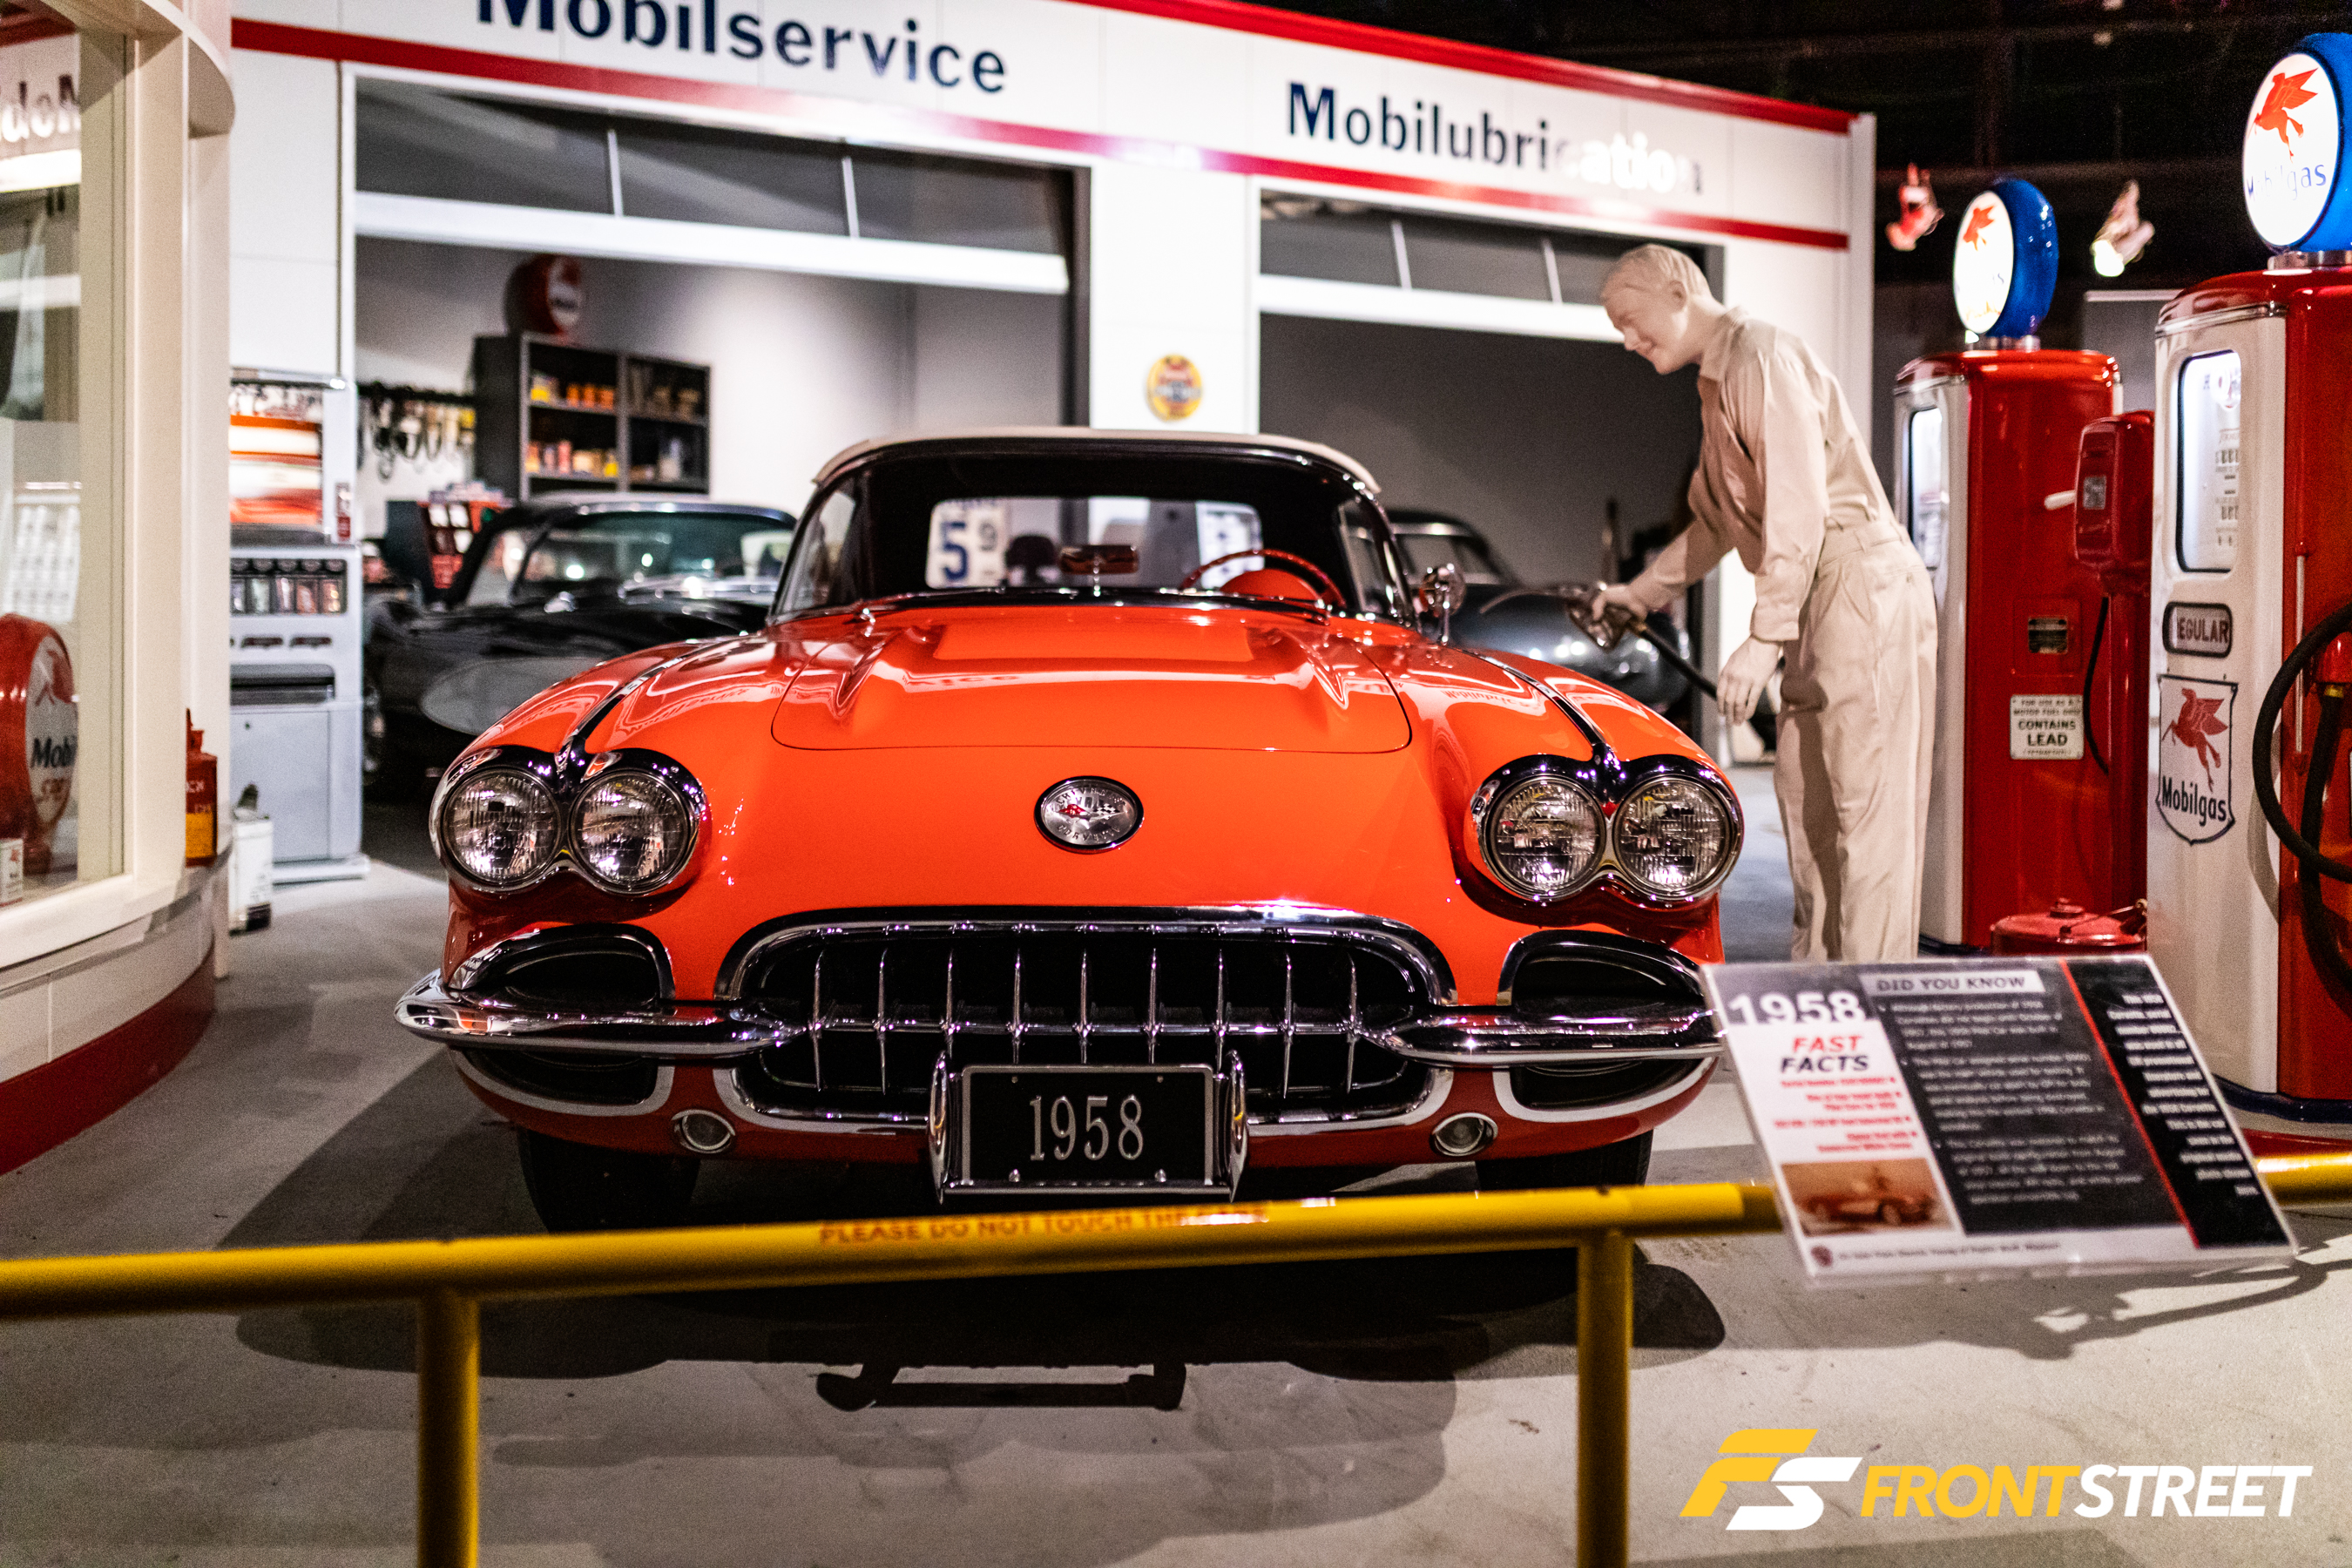 The National Corvette Museum Is An American Treasure